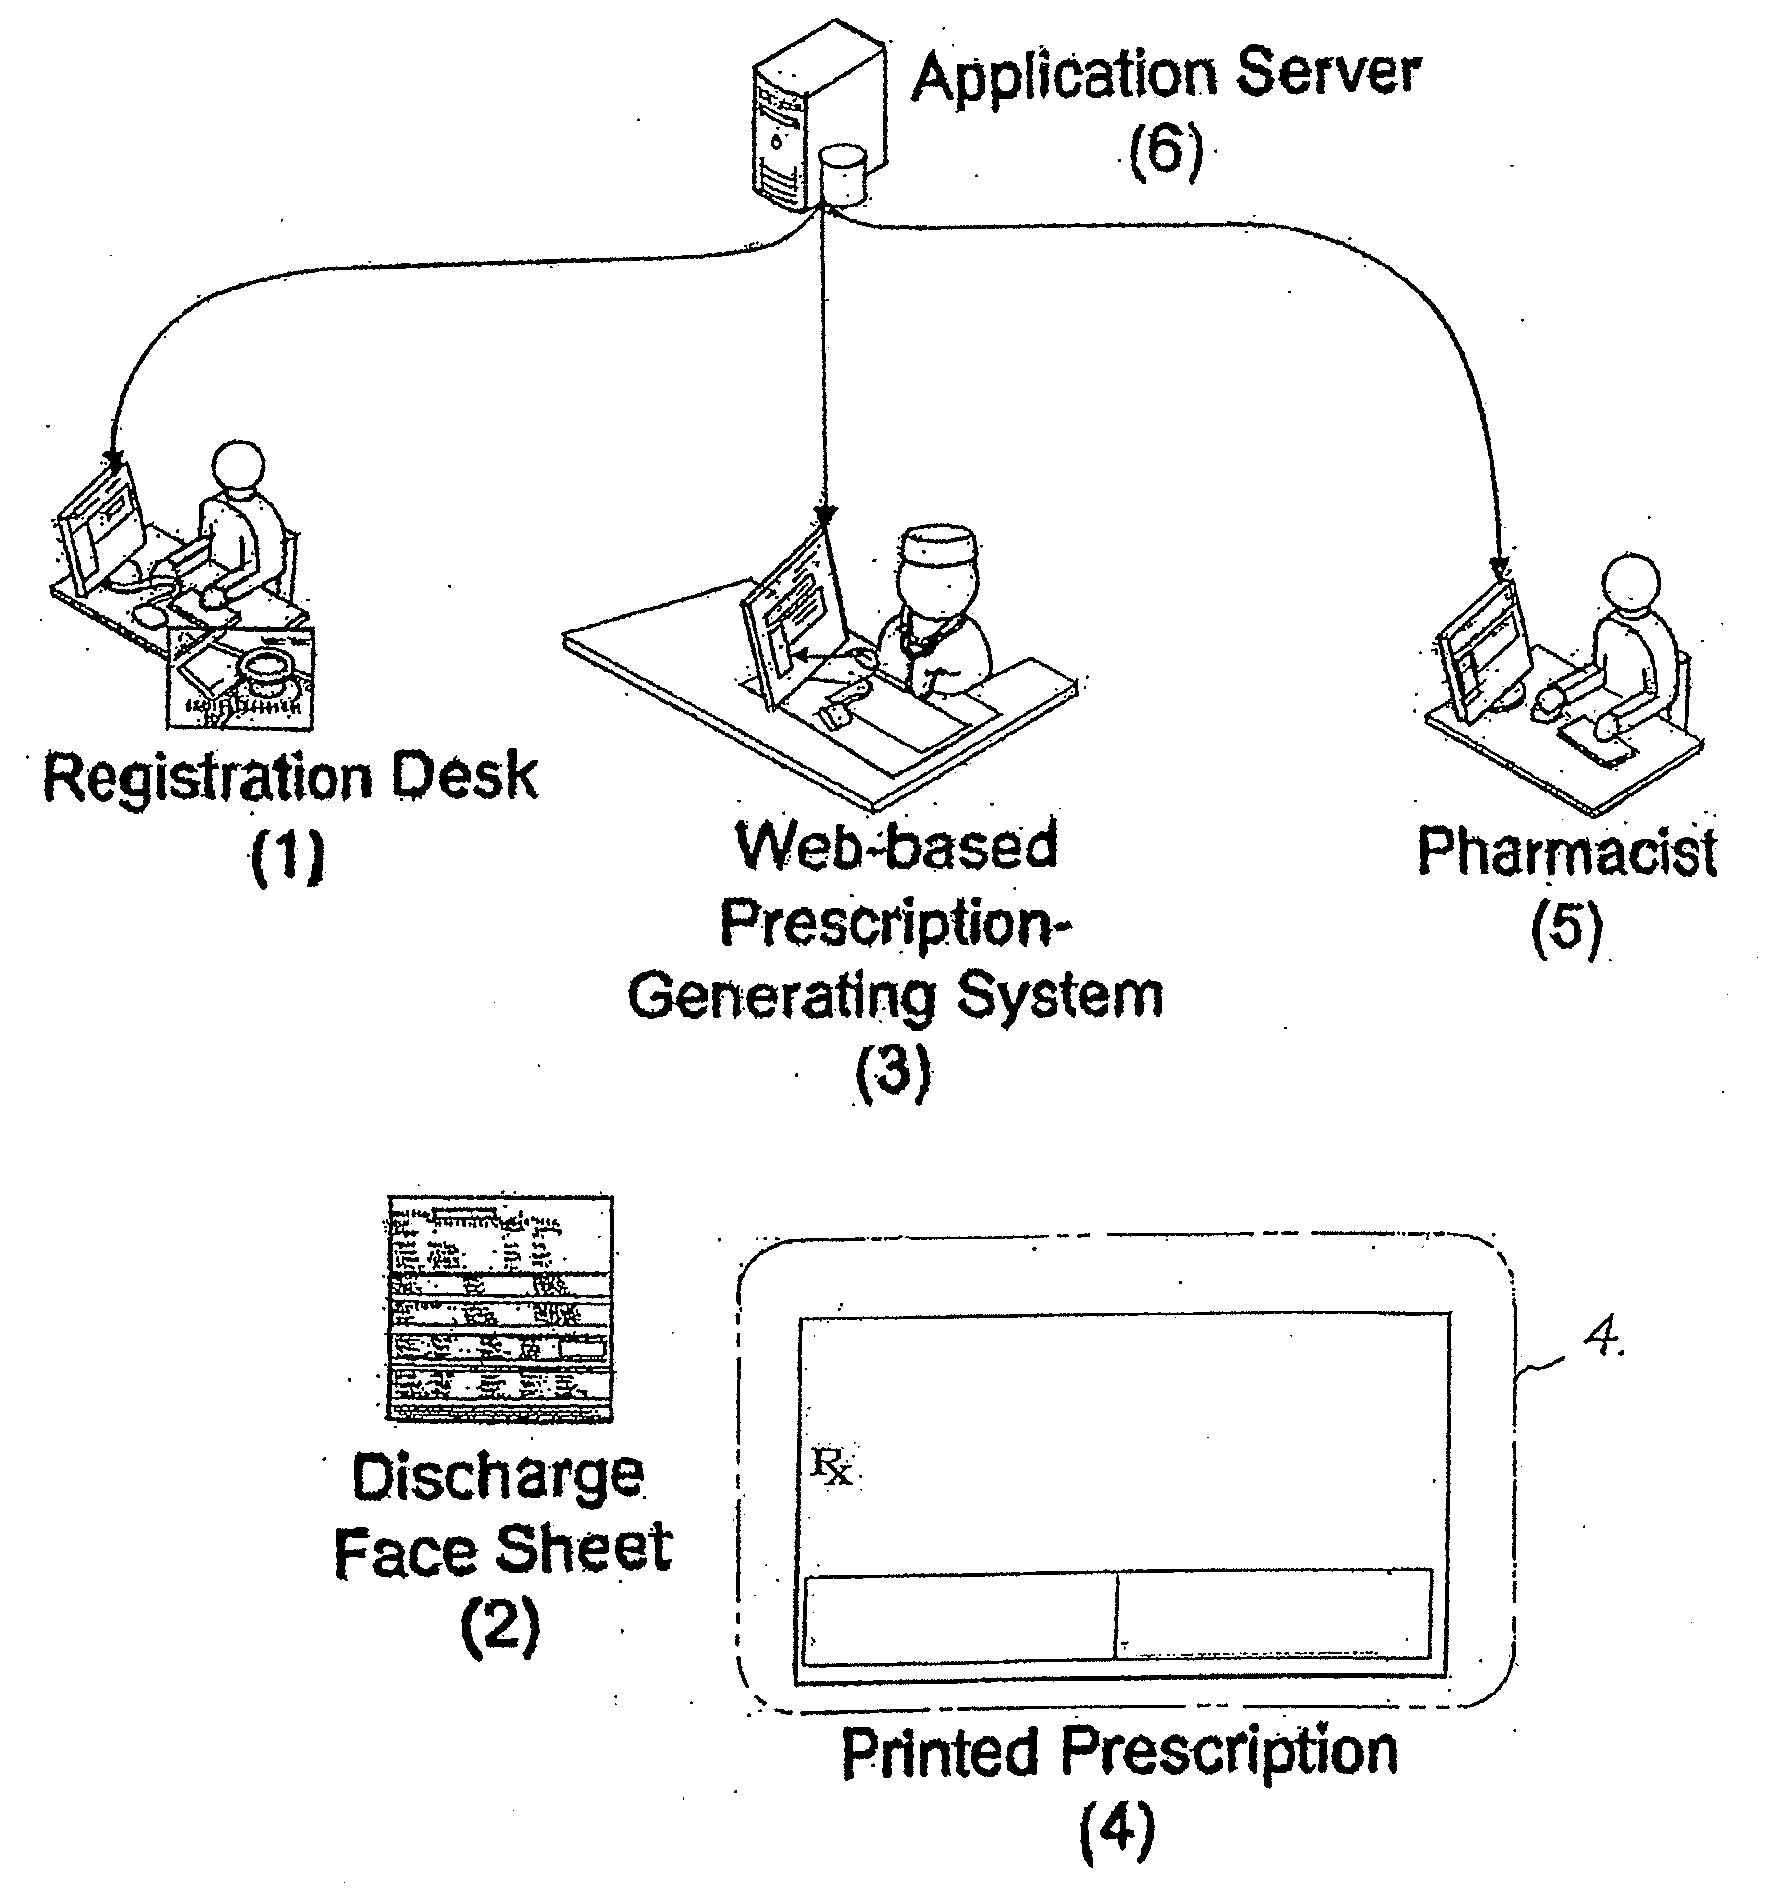 Method and System to Create a National Health Information Infrastructure